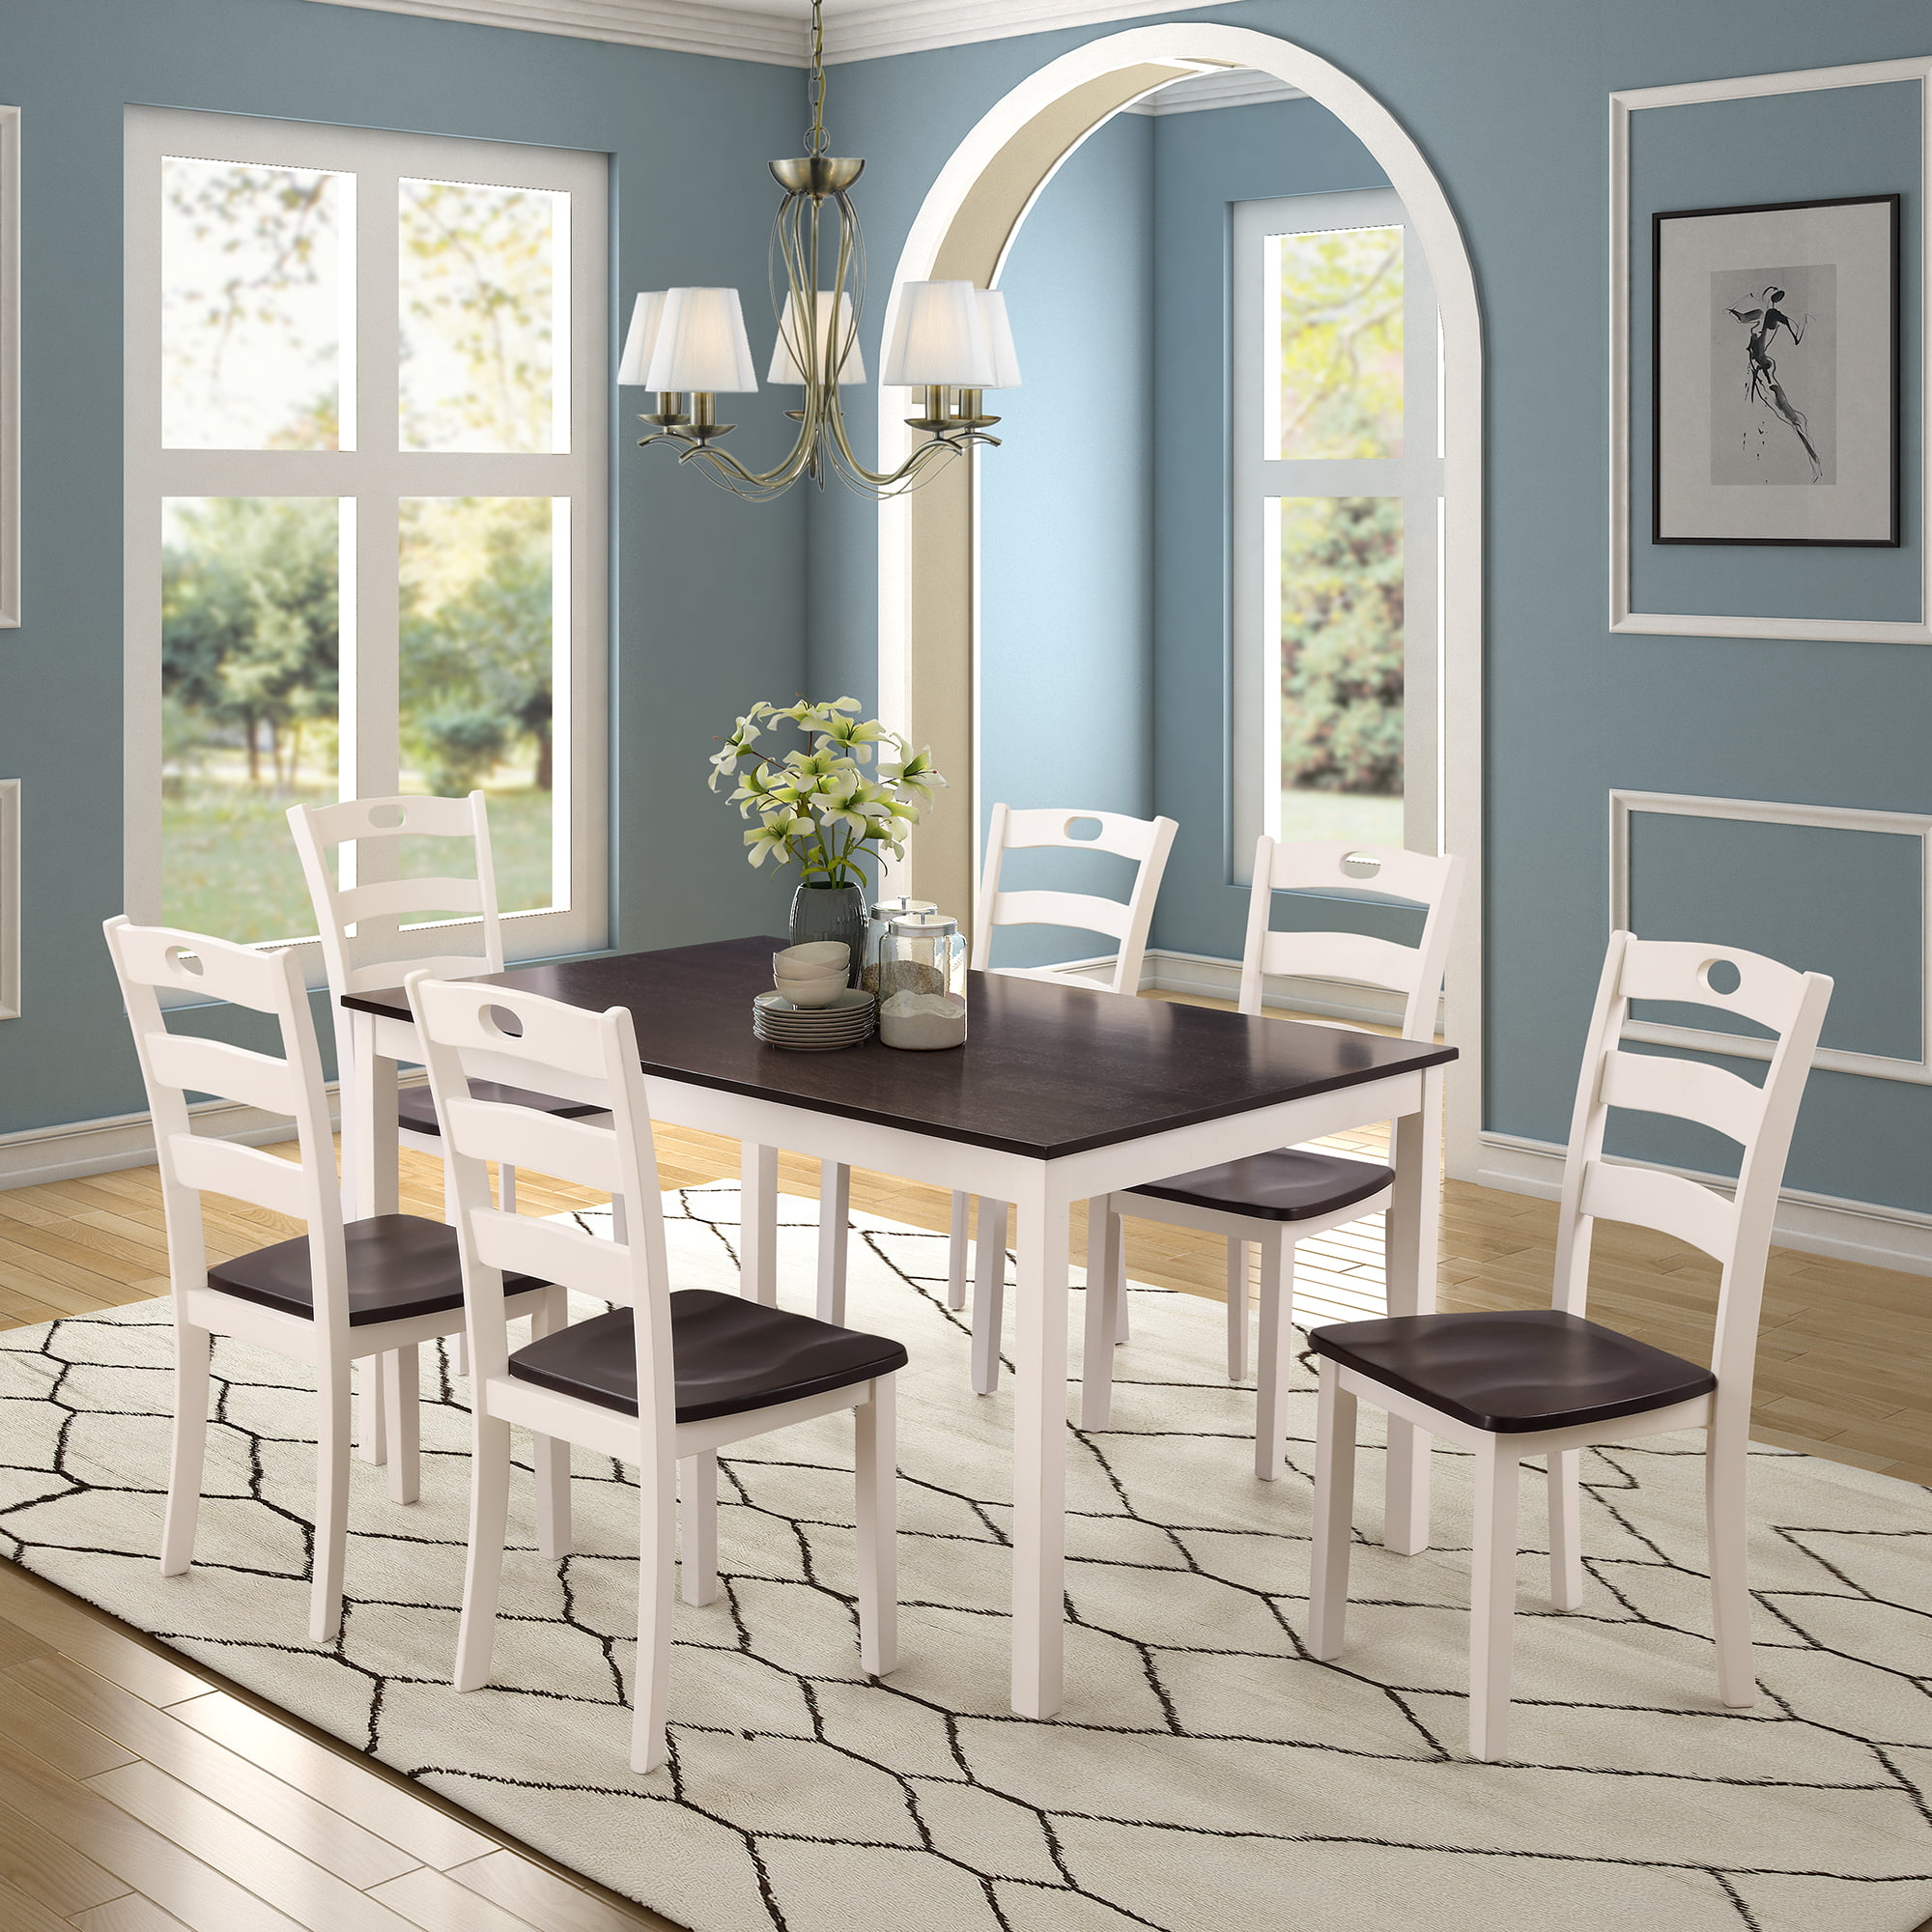 Clearance! Kitchen Table Sets with Chairs, Heavy-Duty ...